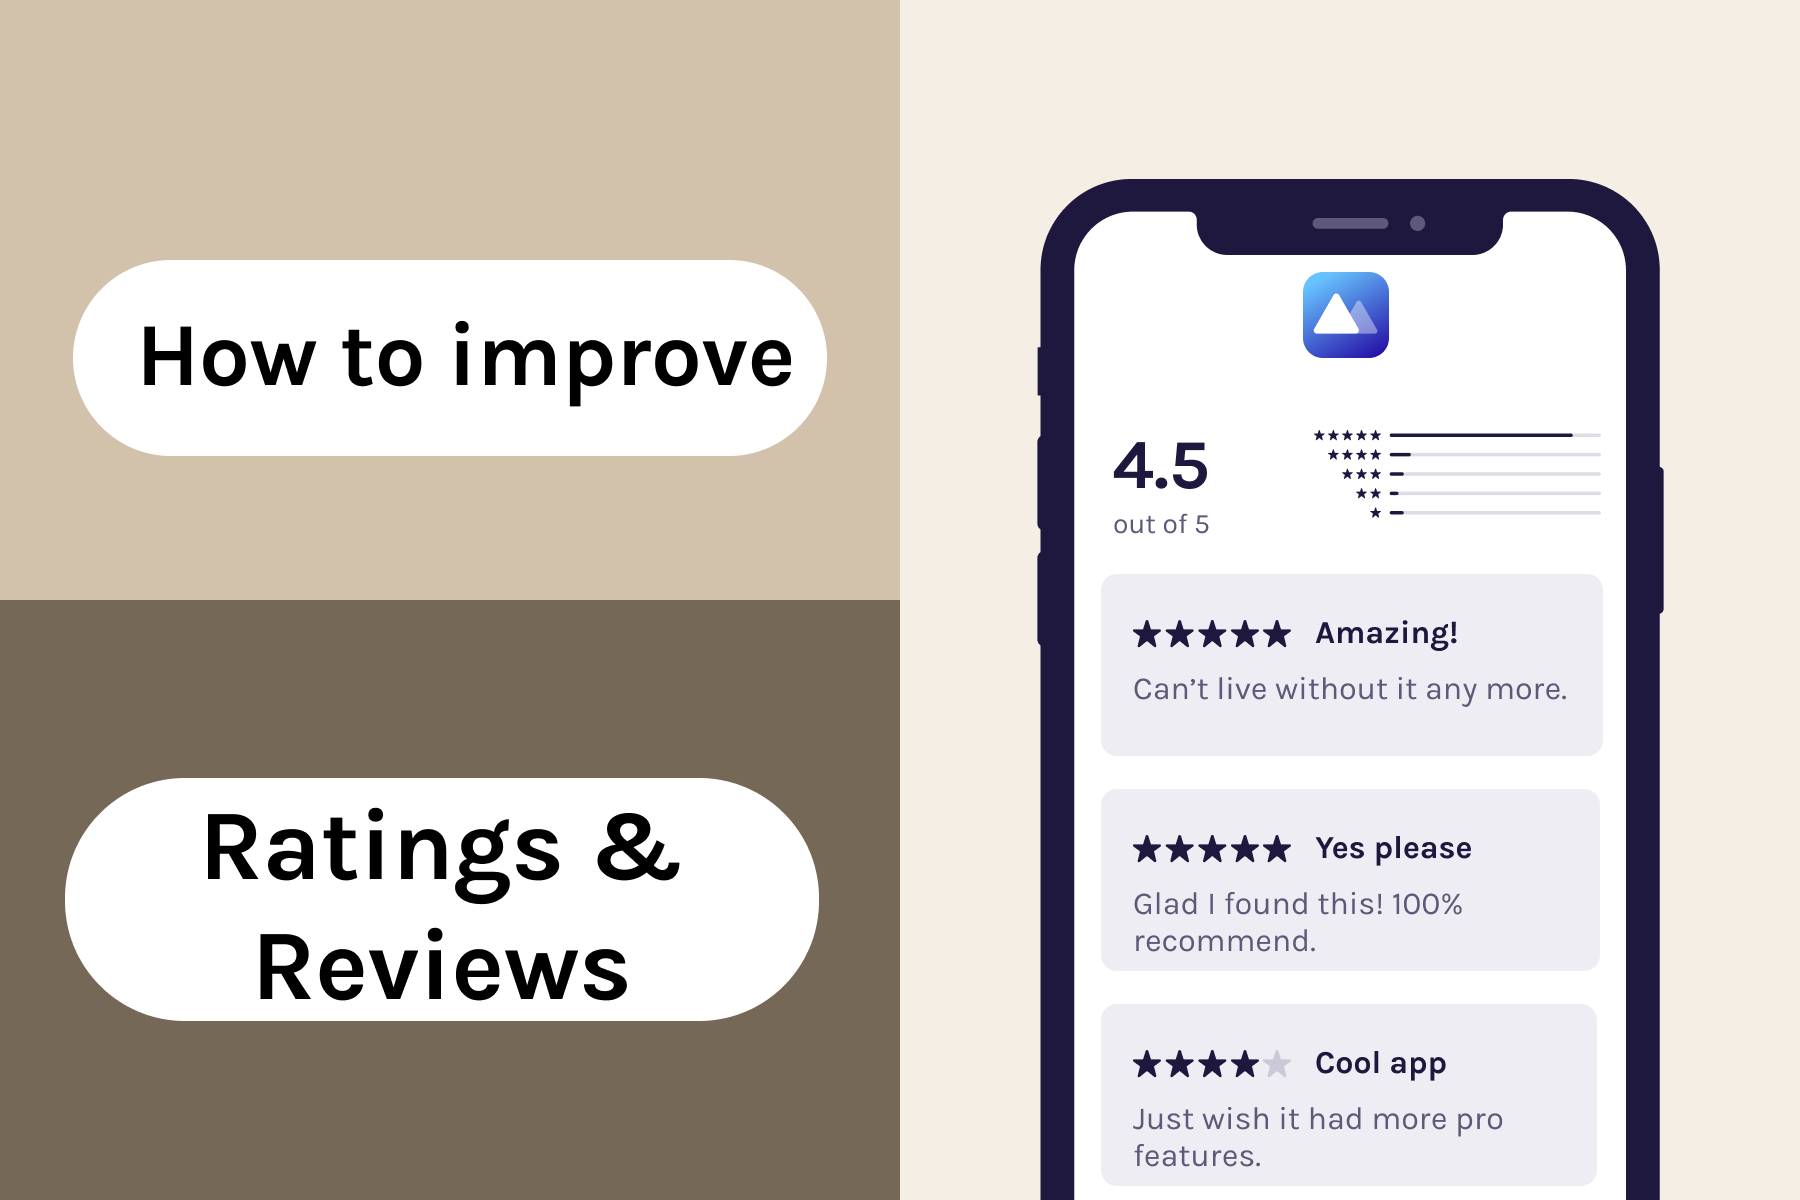 22 great ideas to improve app ratings and reviews in app stores!